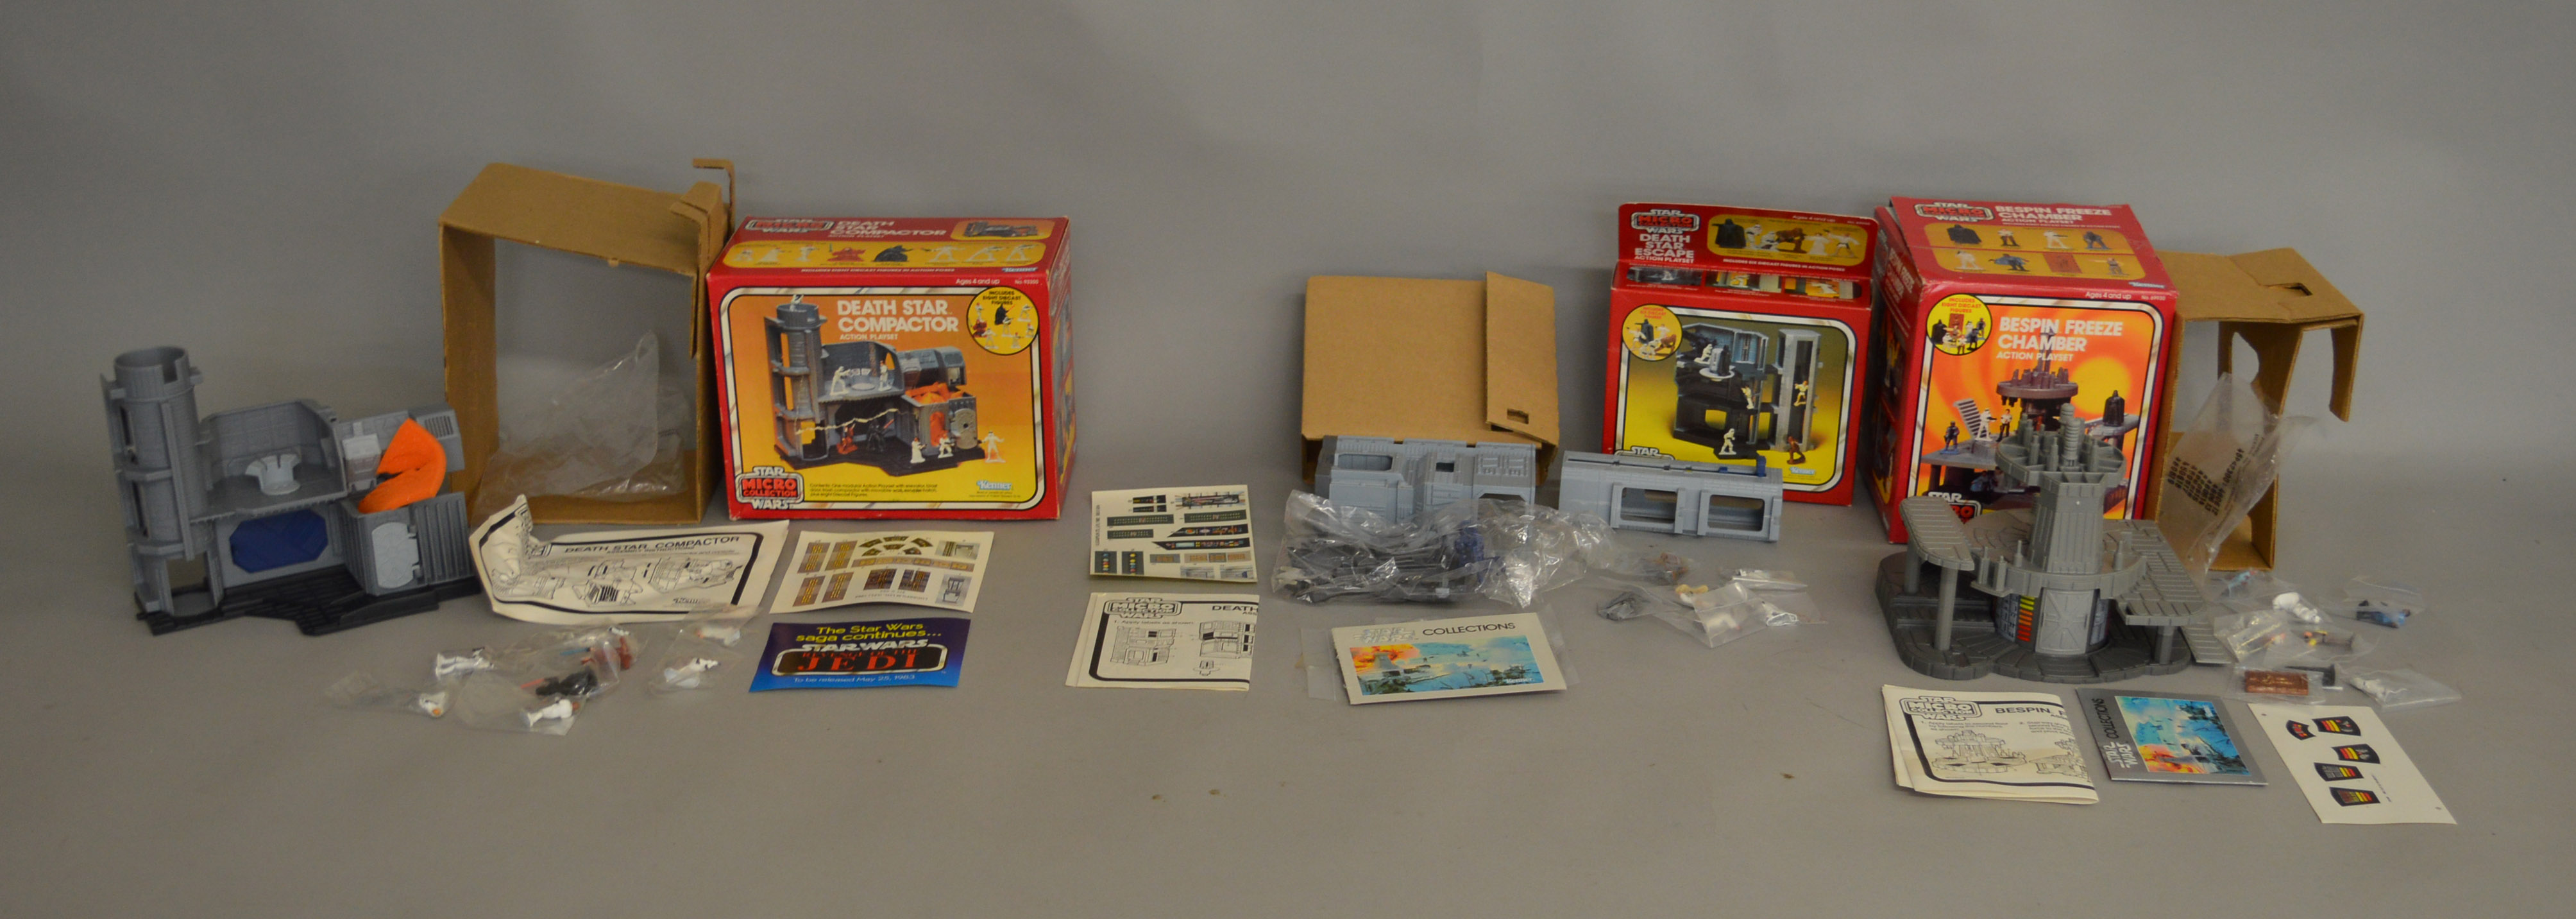 7 Kenner Star Wars Micro Collection sets in original boxes: 69920 Bespin Control Room, 69950 Hoth Wa - Image 2 of 3